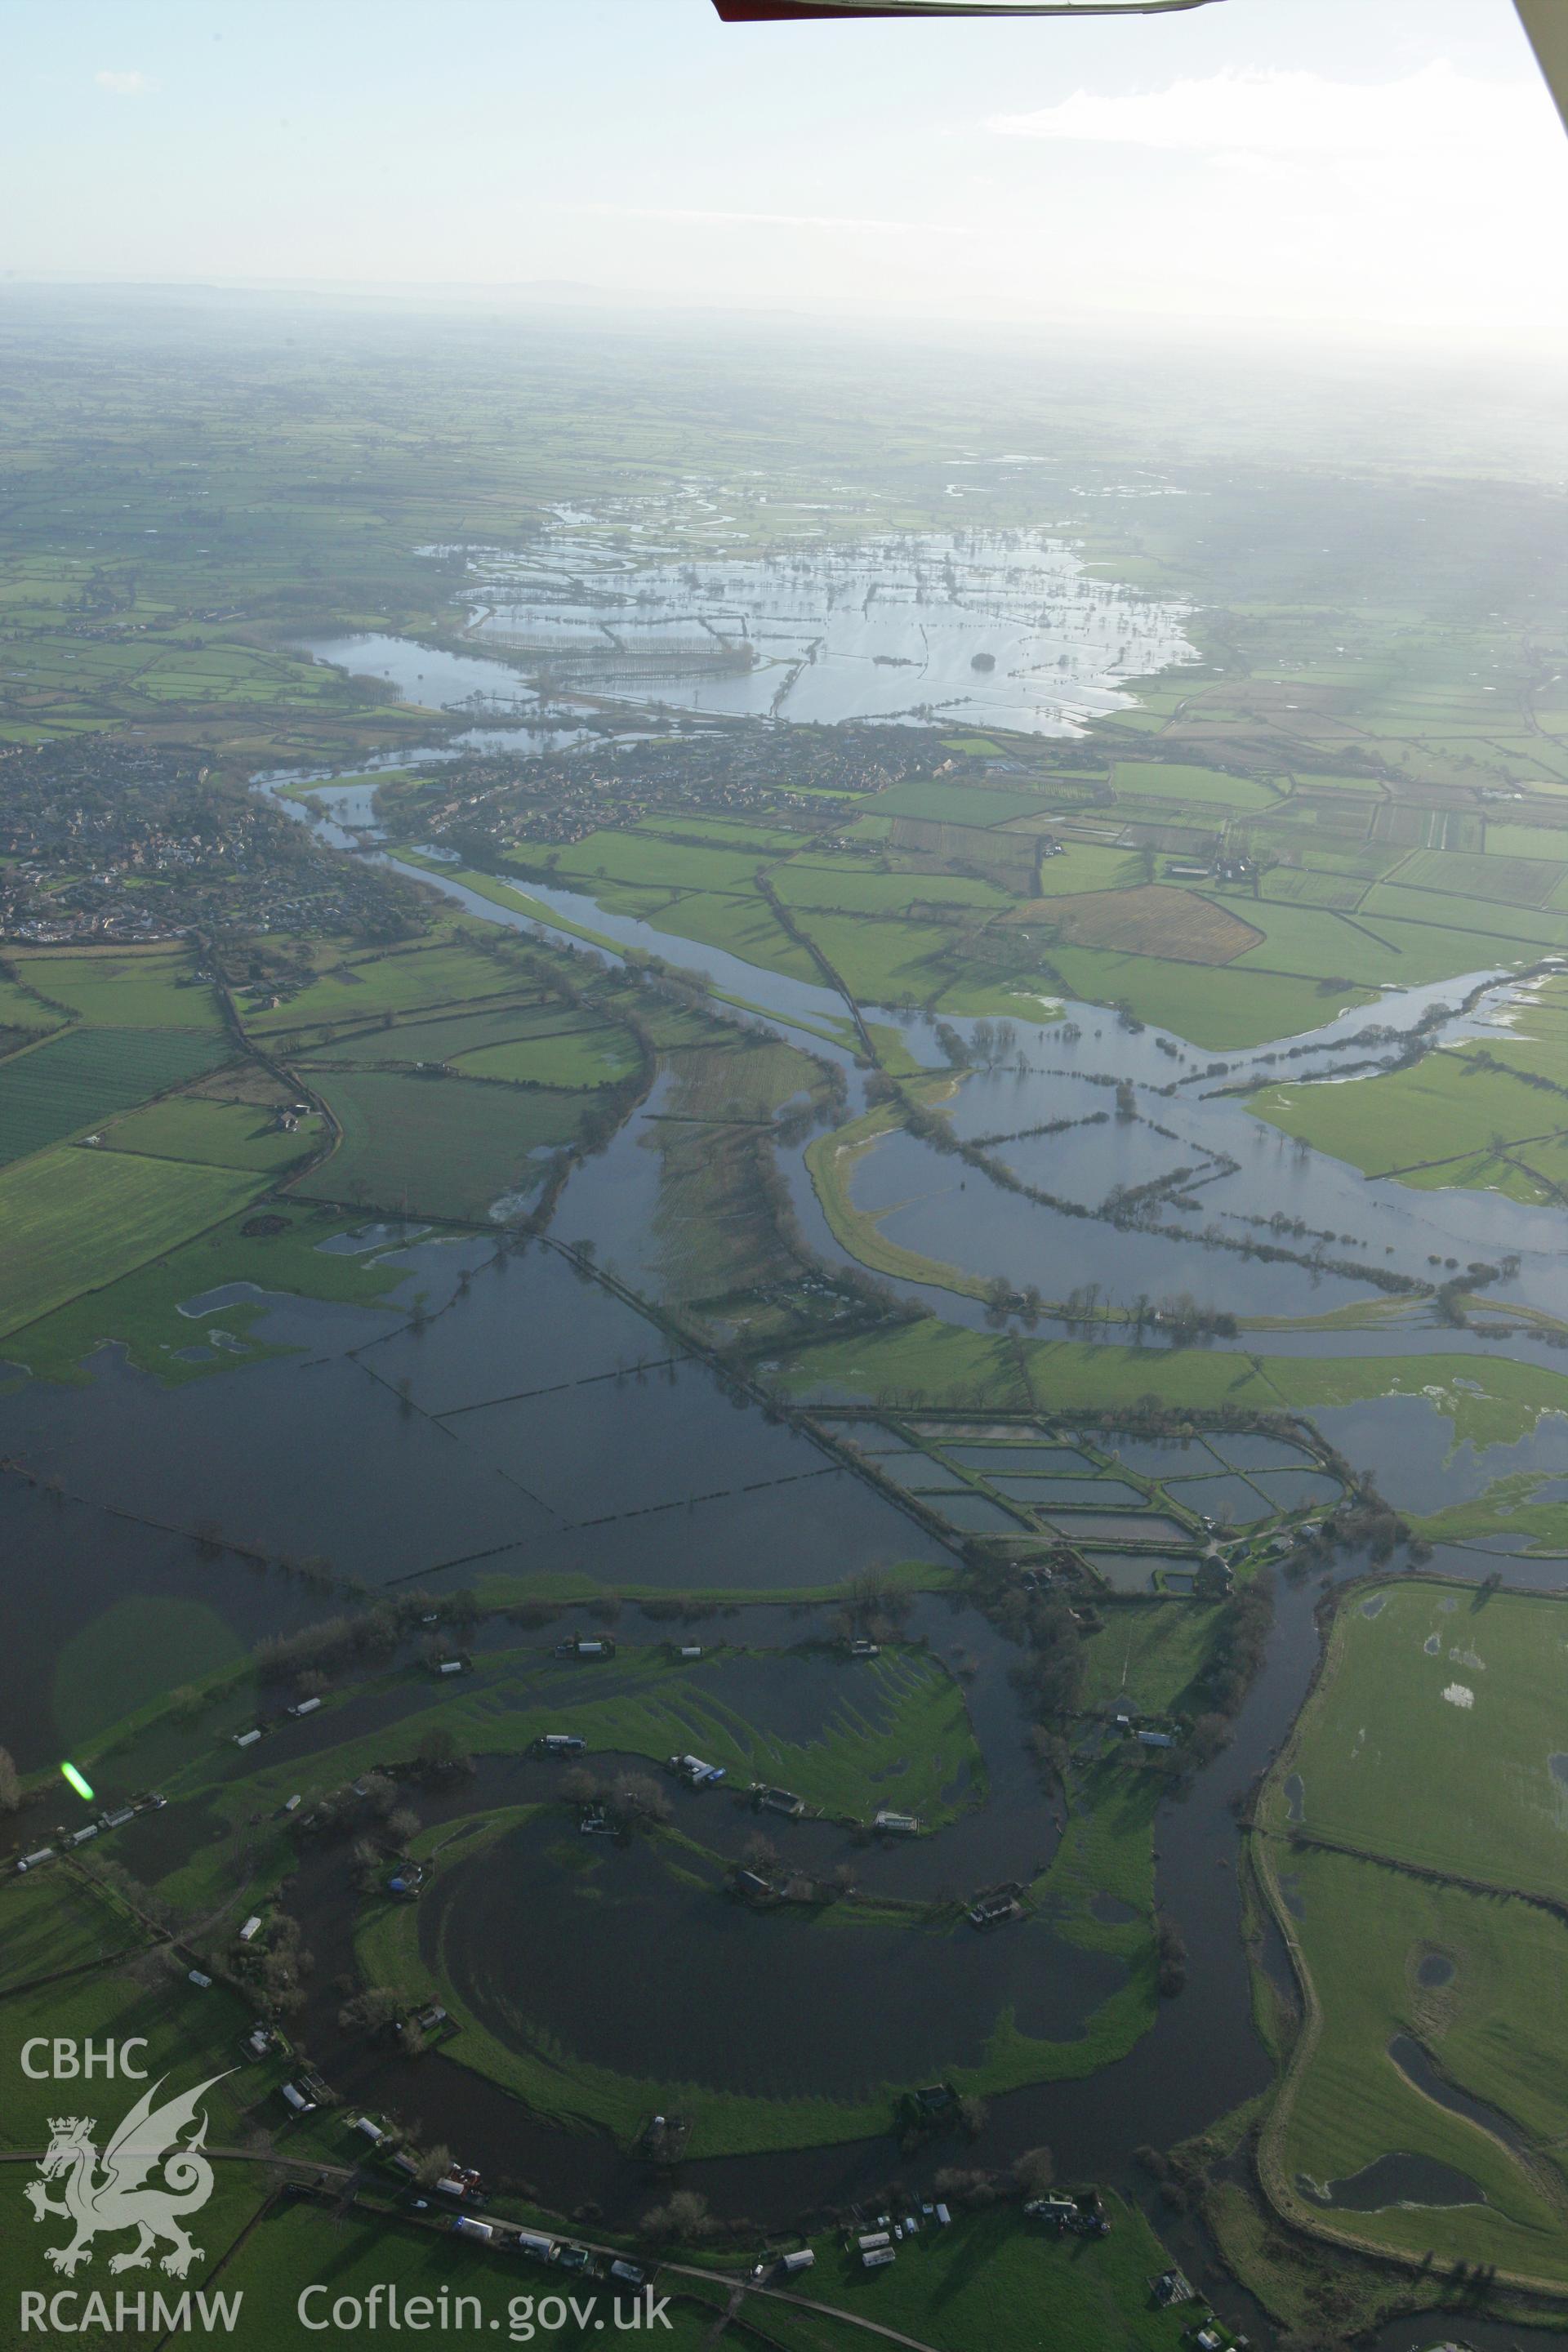 RCAHMW colour oblique photograph of River Dee, flooded landscape towards Holt. Taken by Toby Driver on 11/12/2007.